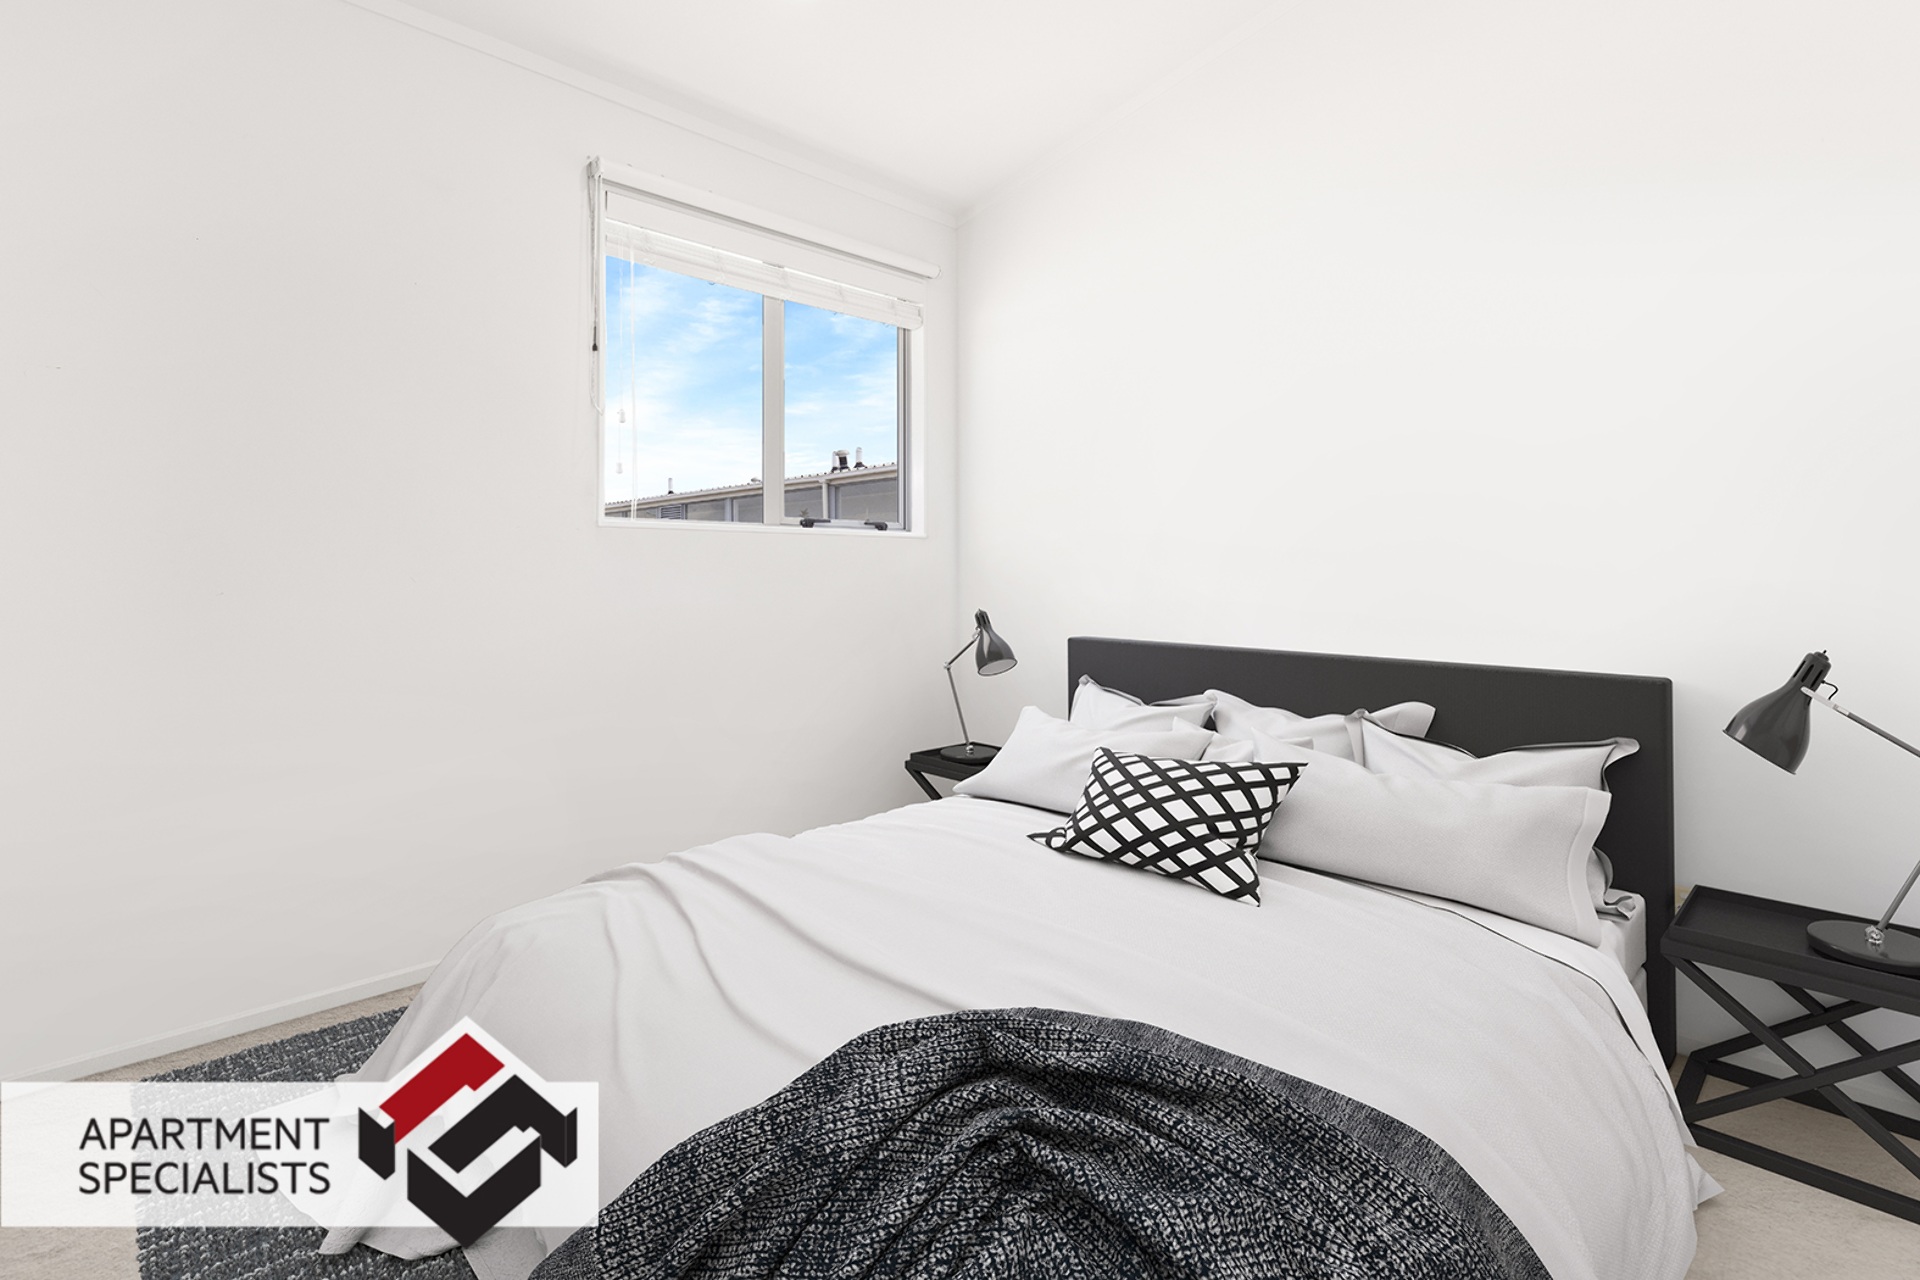 18 | 26 Morningside Drive, Morningside | Apartment Specialists